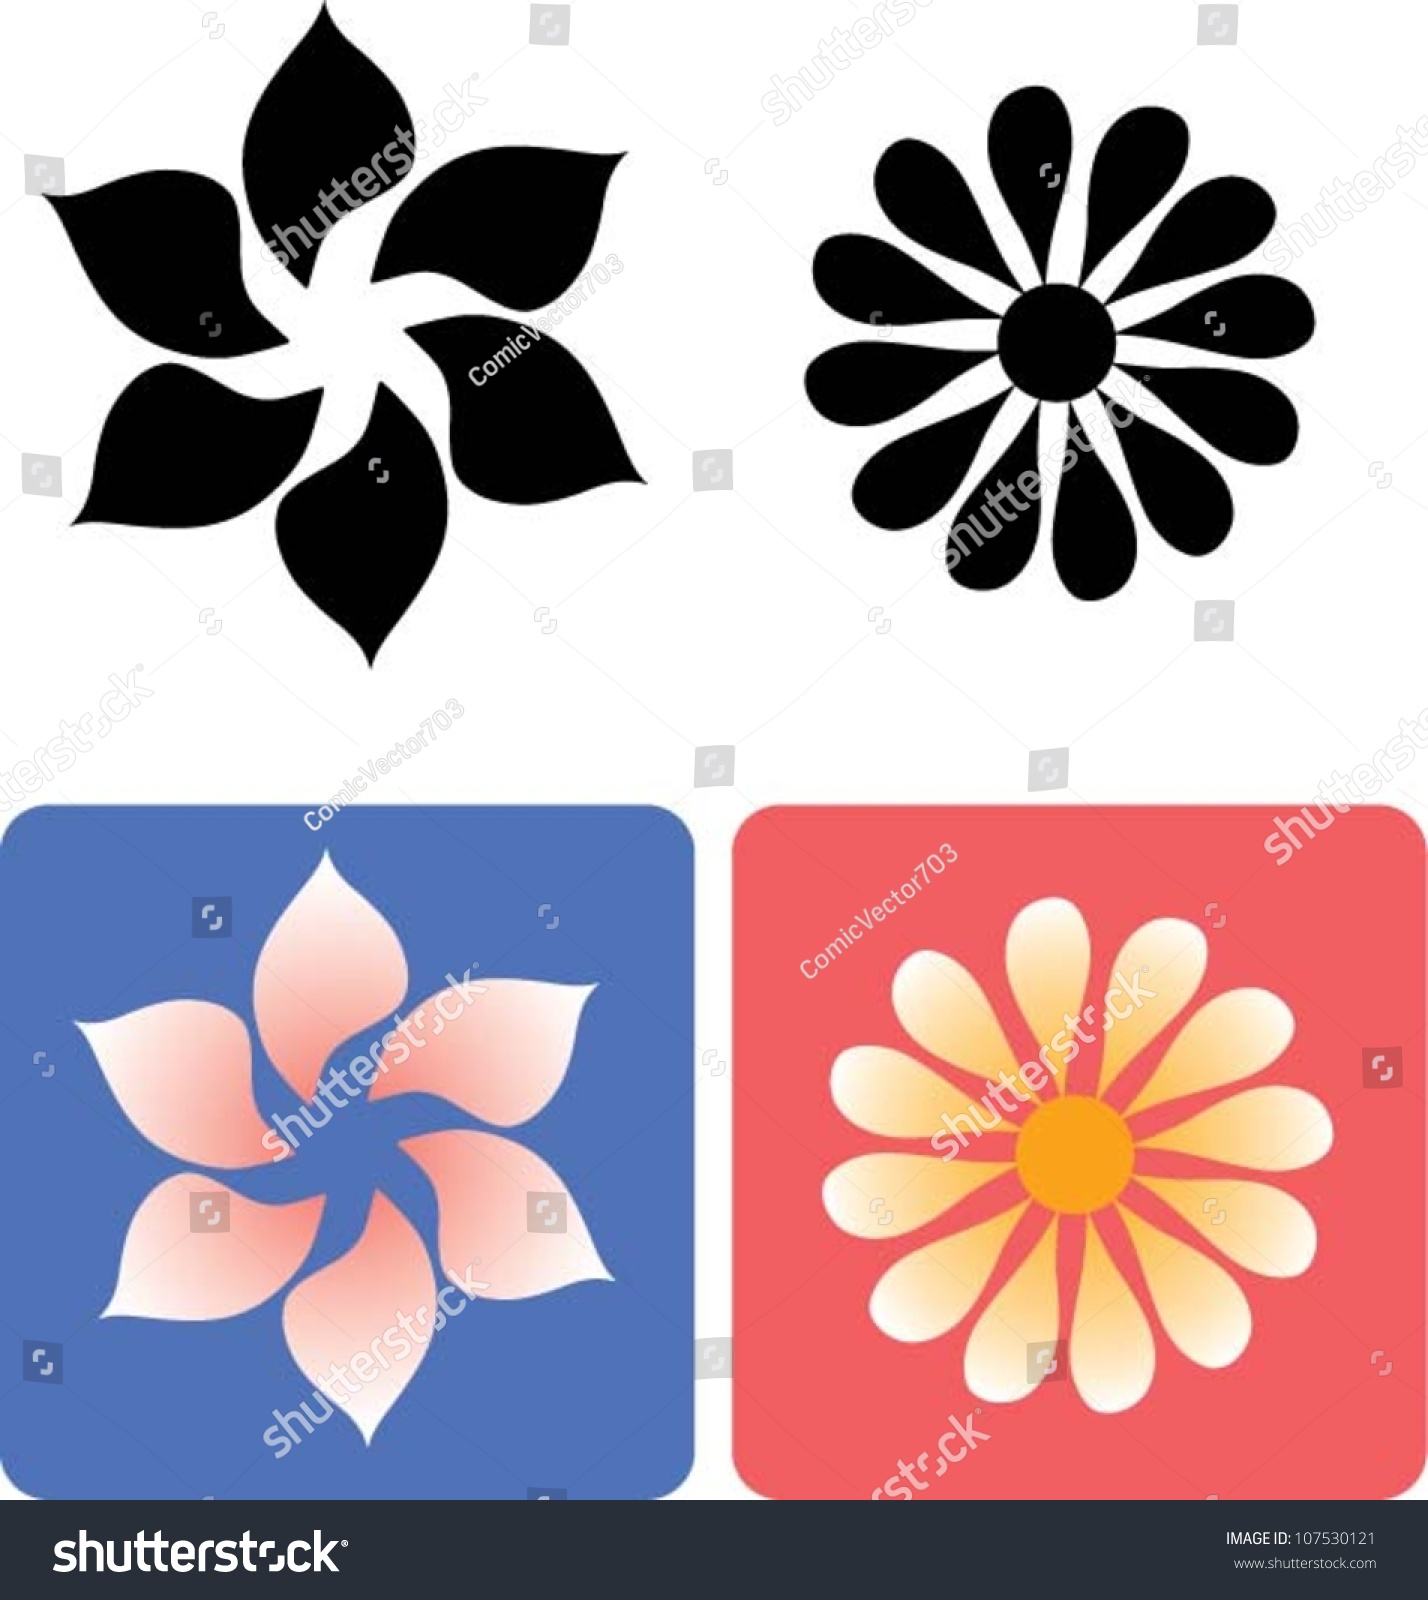 Flower 1 Floral Element Any Design Stock Vector Royalty Free 107530121